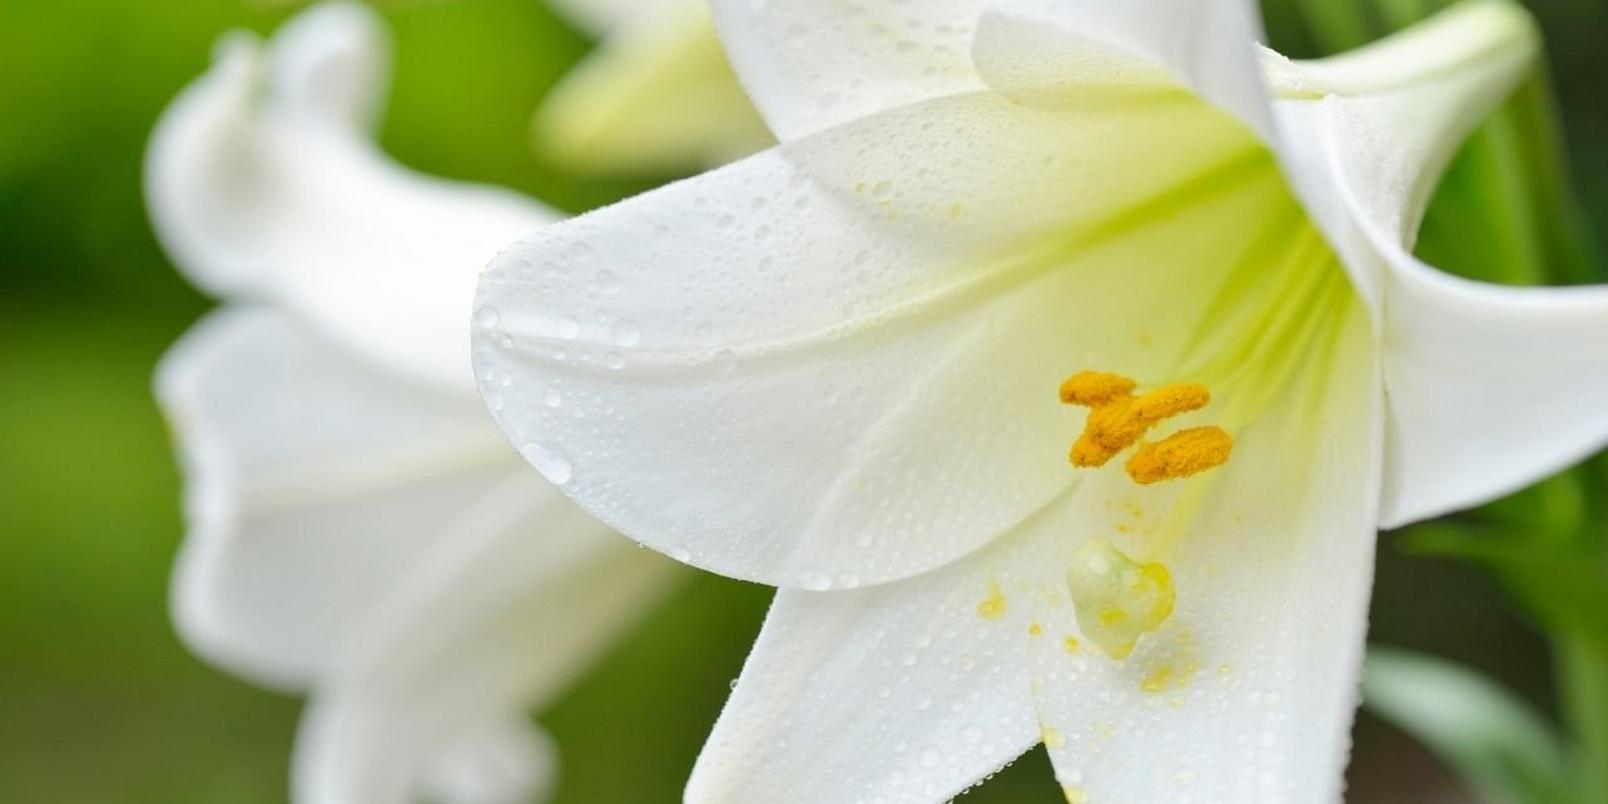 easter_lilies